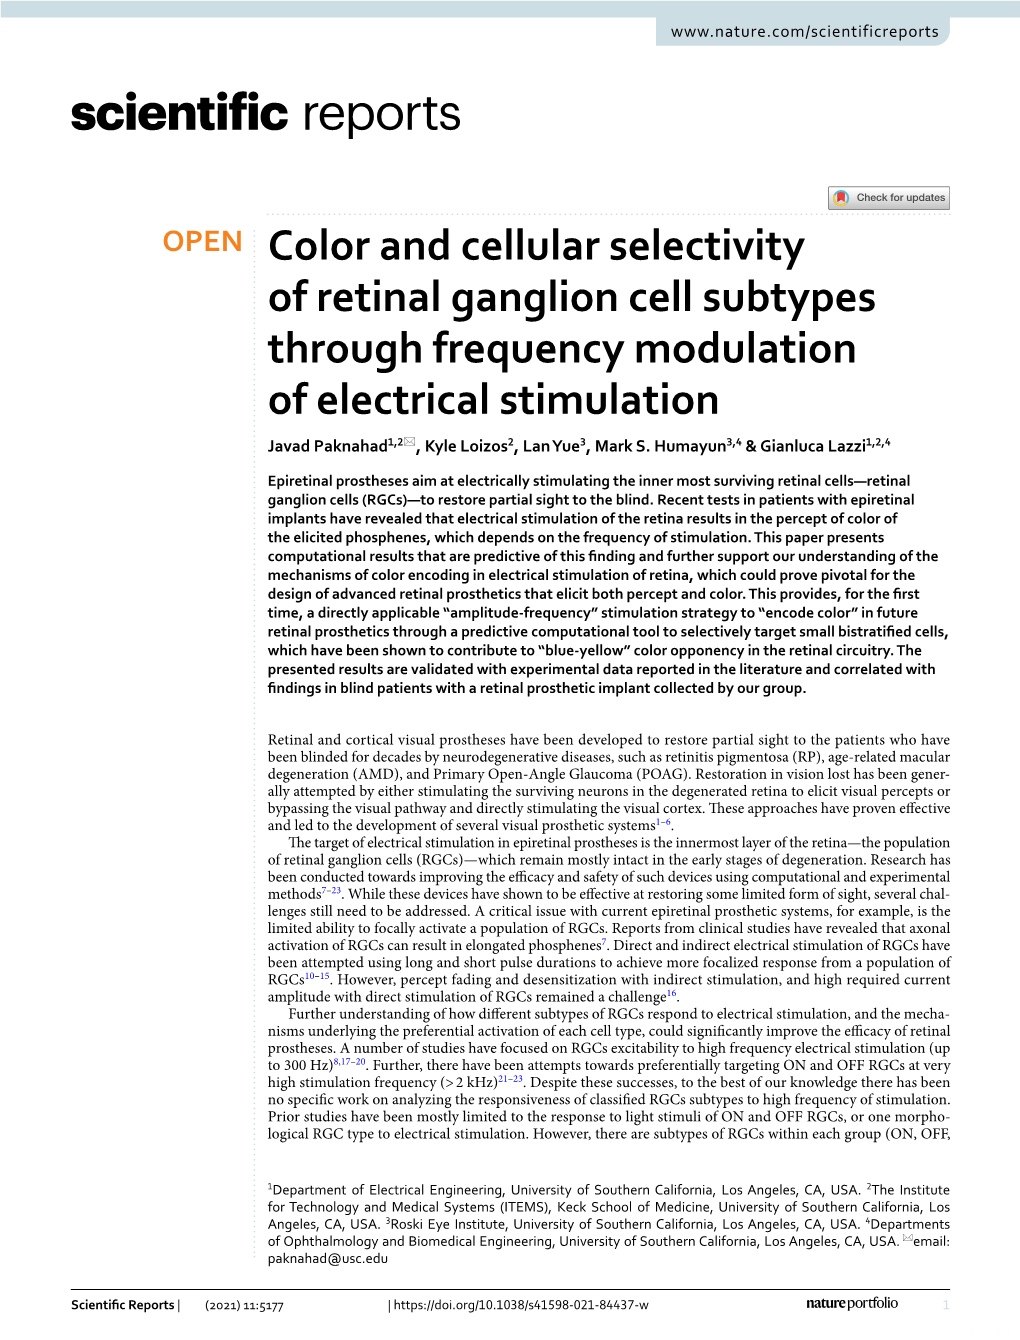 Color and Cellular Selectivity of Retinal Ganglion Cell Subtypes Through Frequency Modulation of Electrical Stimulation